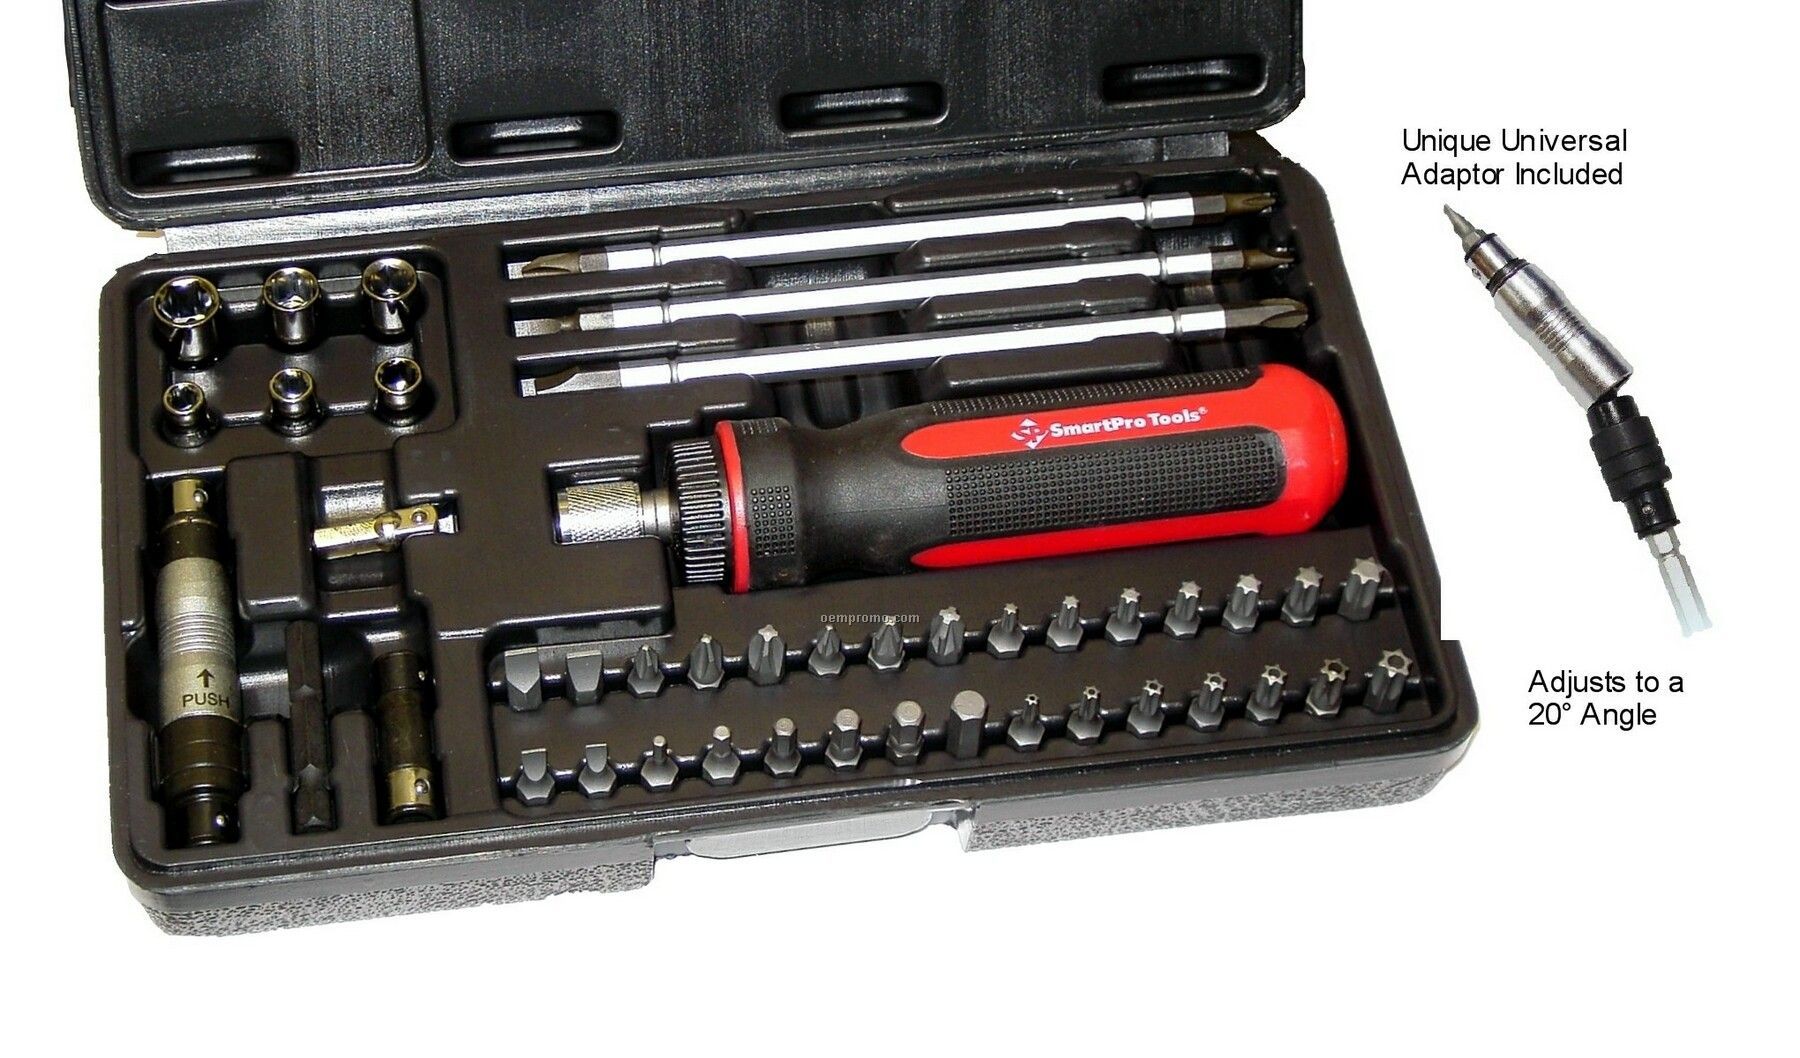 44 Piece Bit And Socket Set With Universal Adapter